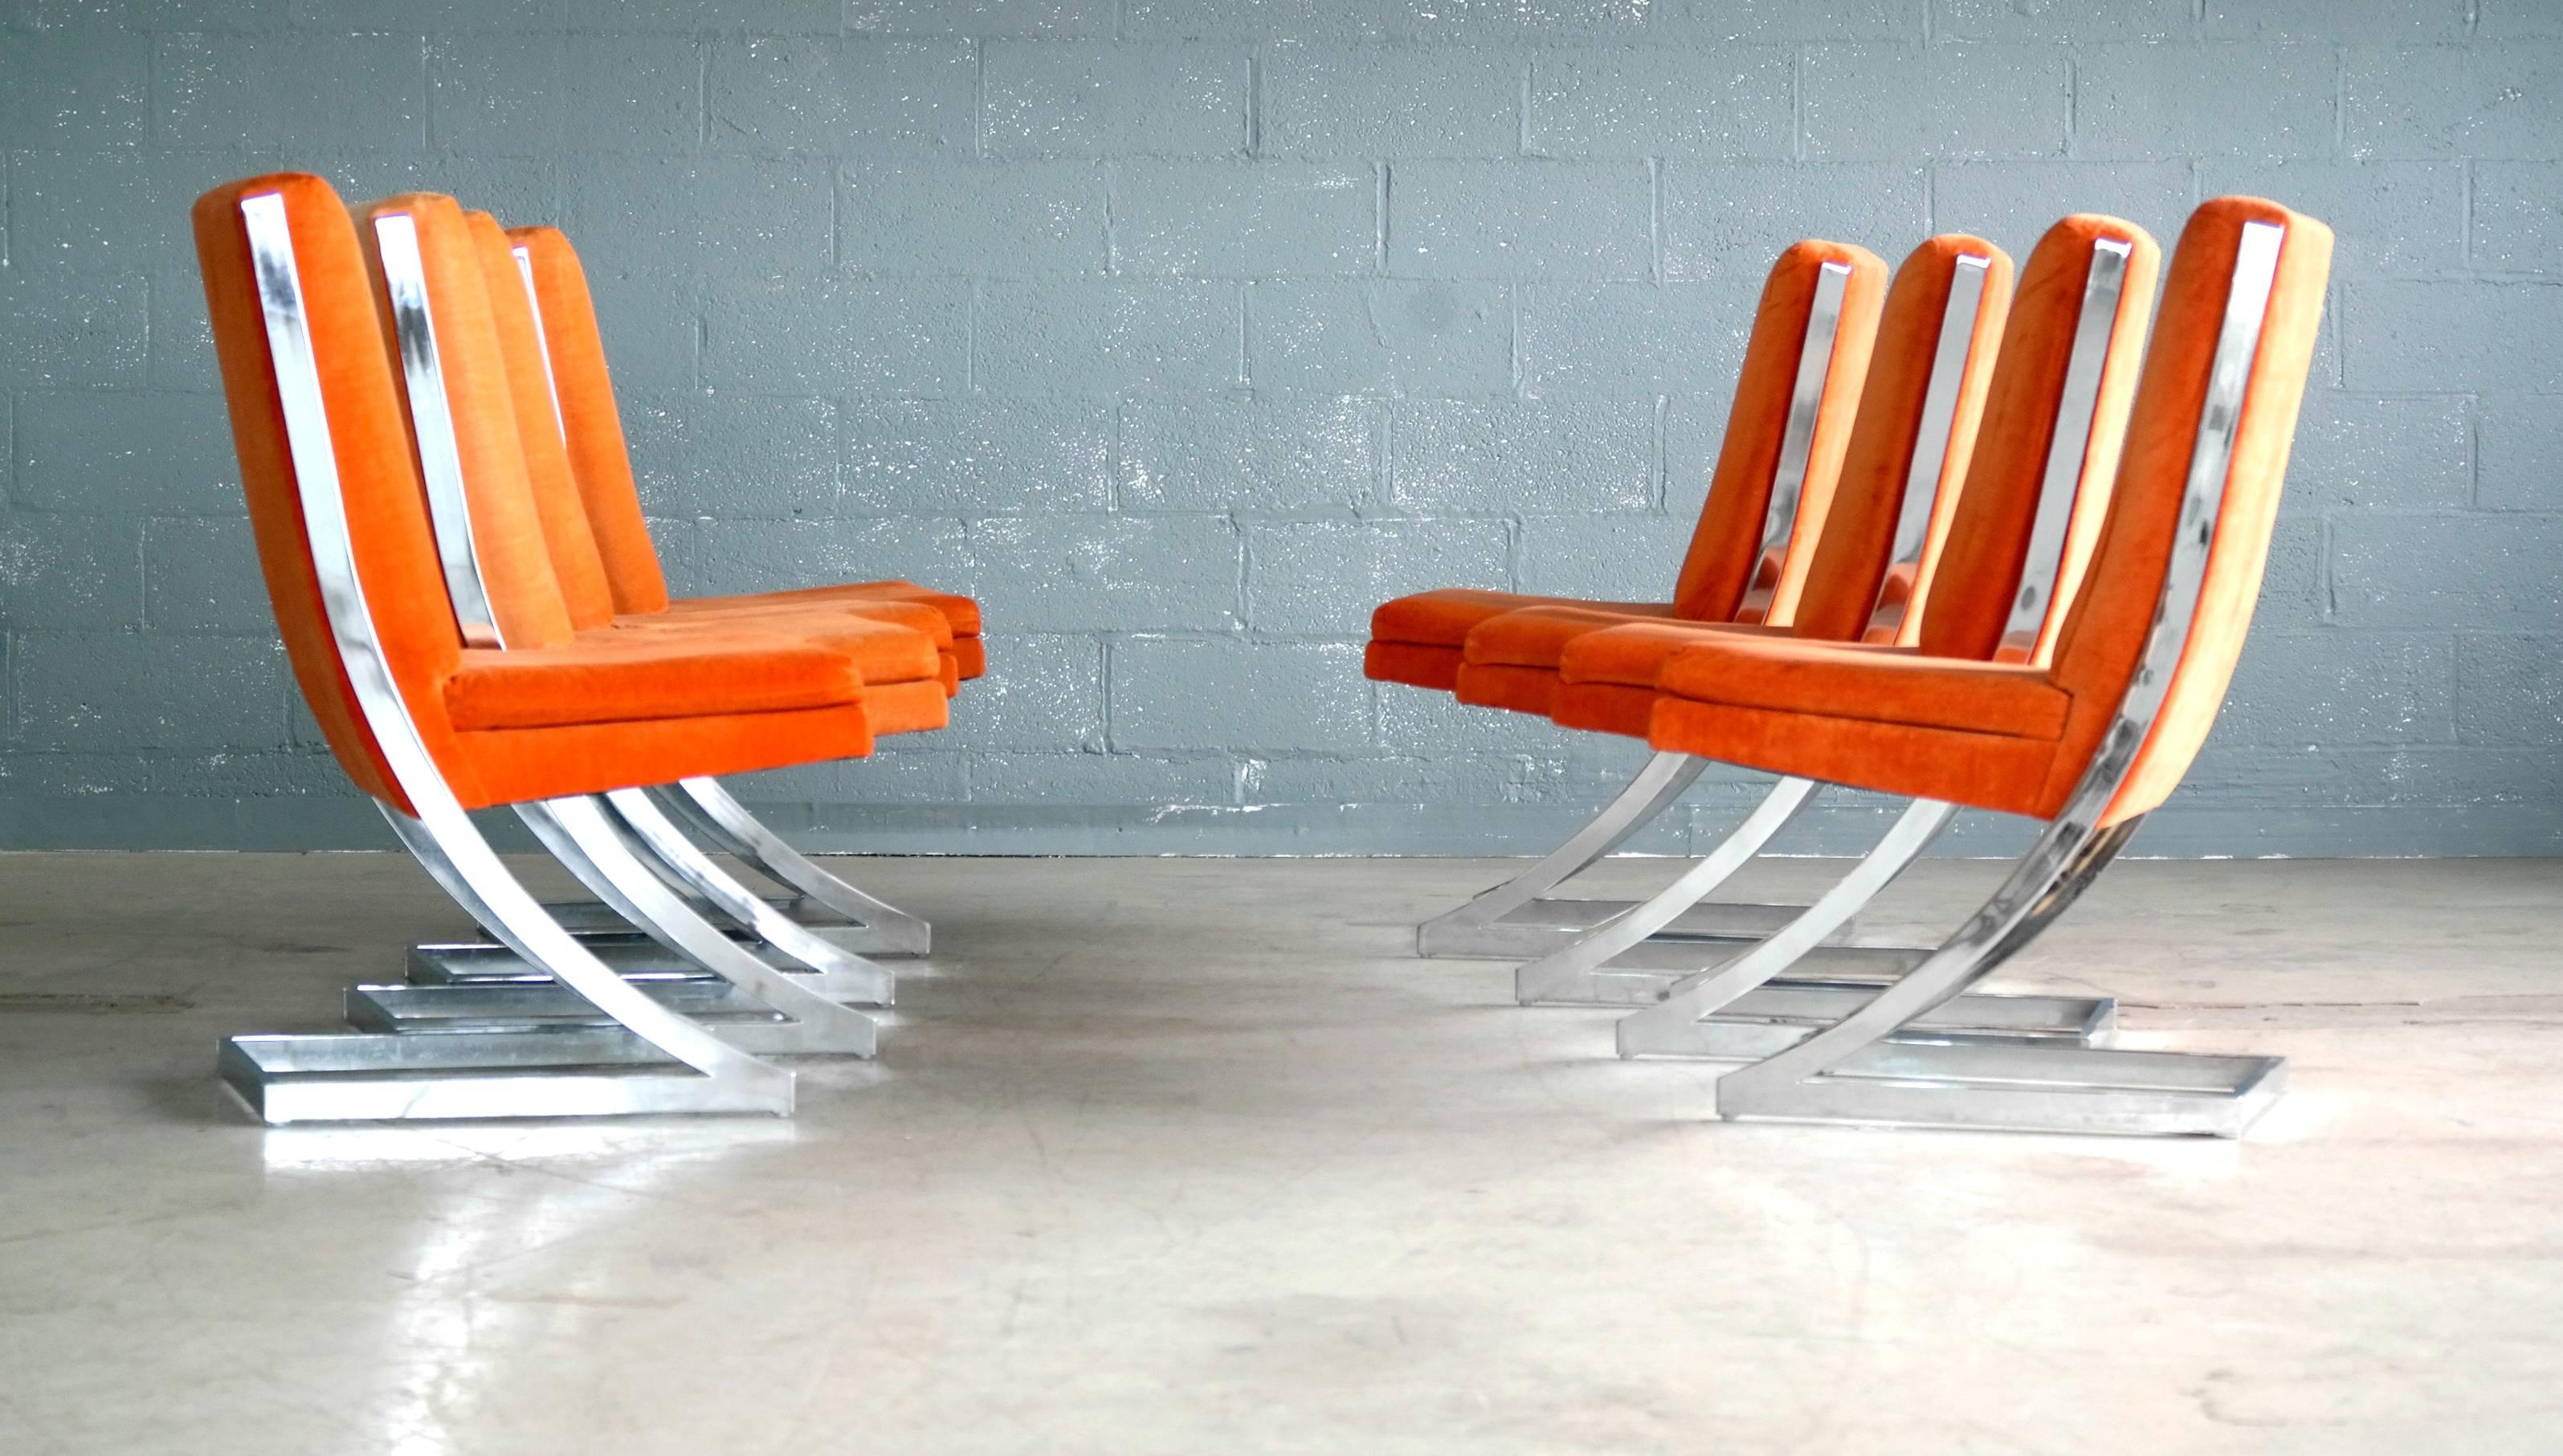 Fantastic set of eight cantilevered chrome dining chairs designed by Milo Baughman for Design Institute of America. Original fabric in vibrant orange shows wear consistent with age and some minor sun fading in a few places. Still very usable but